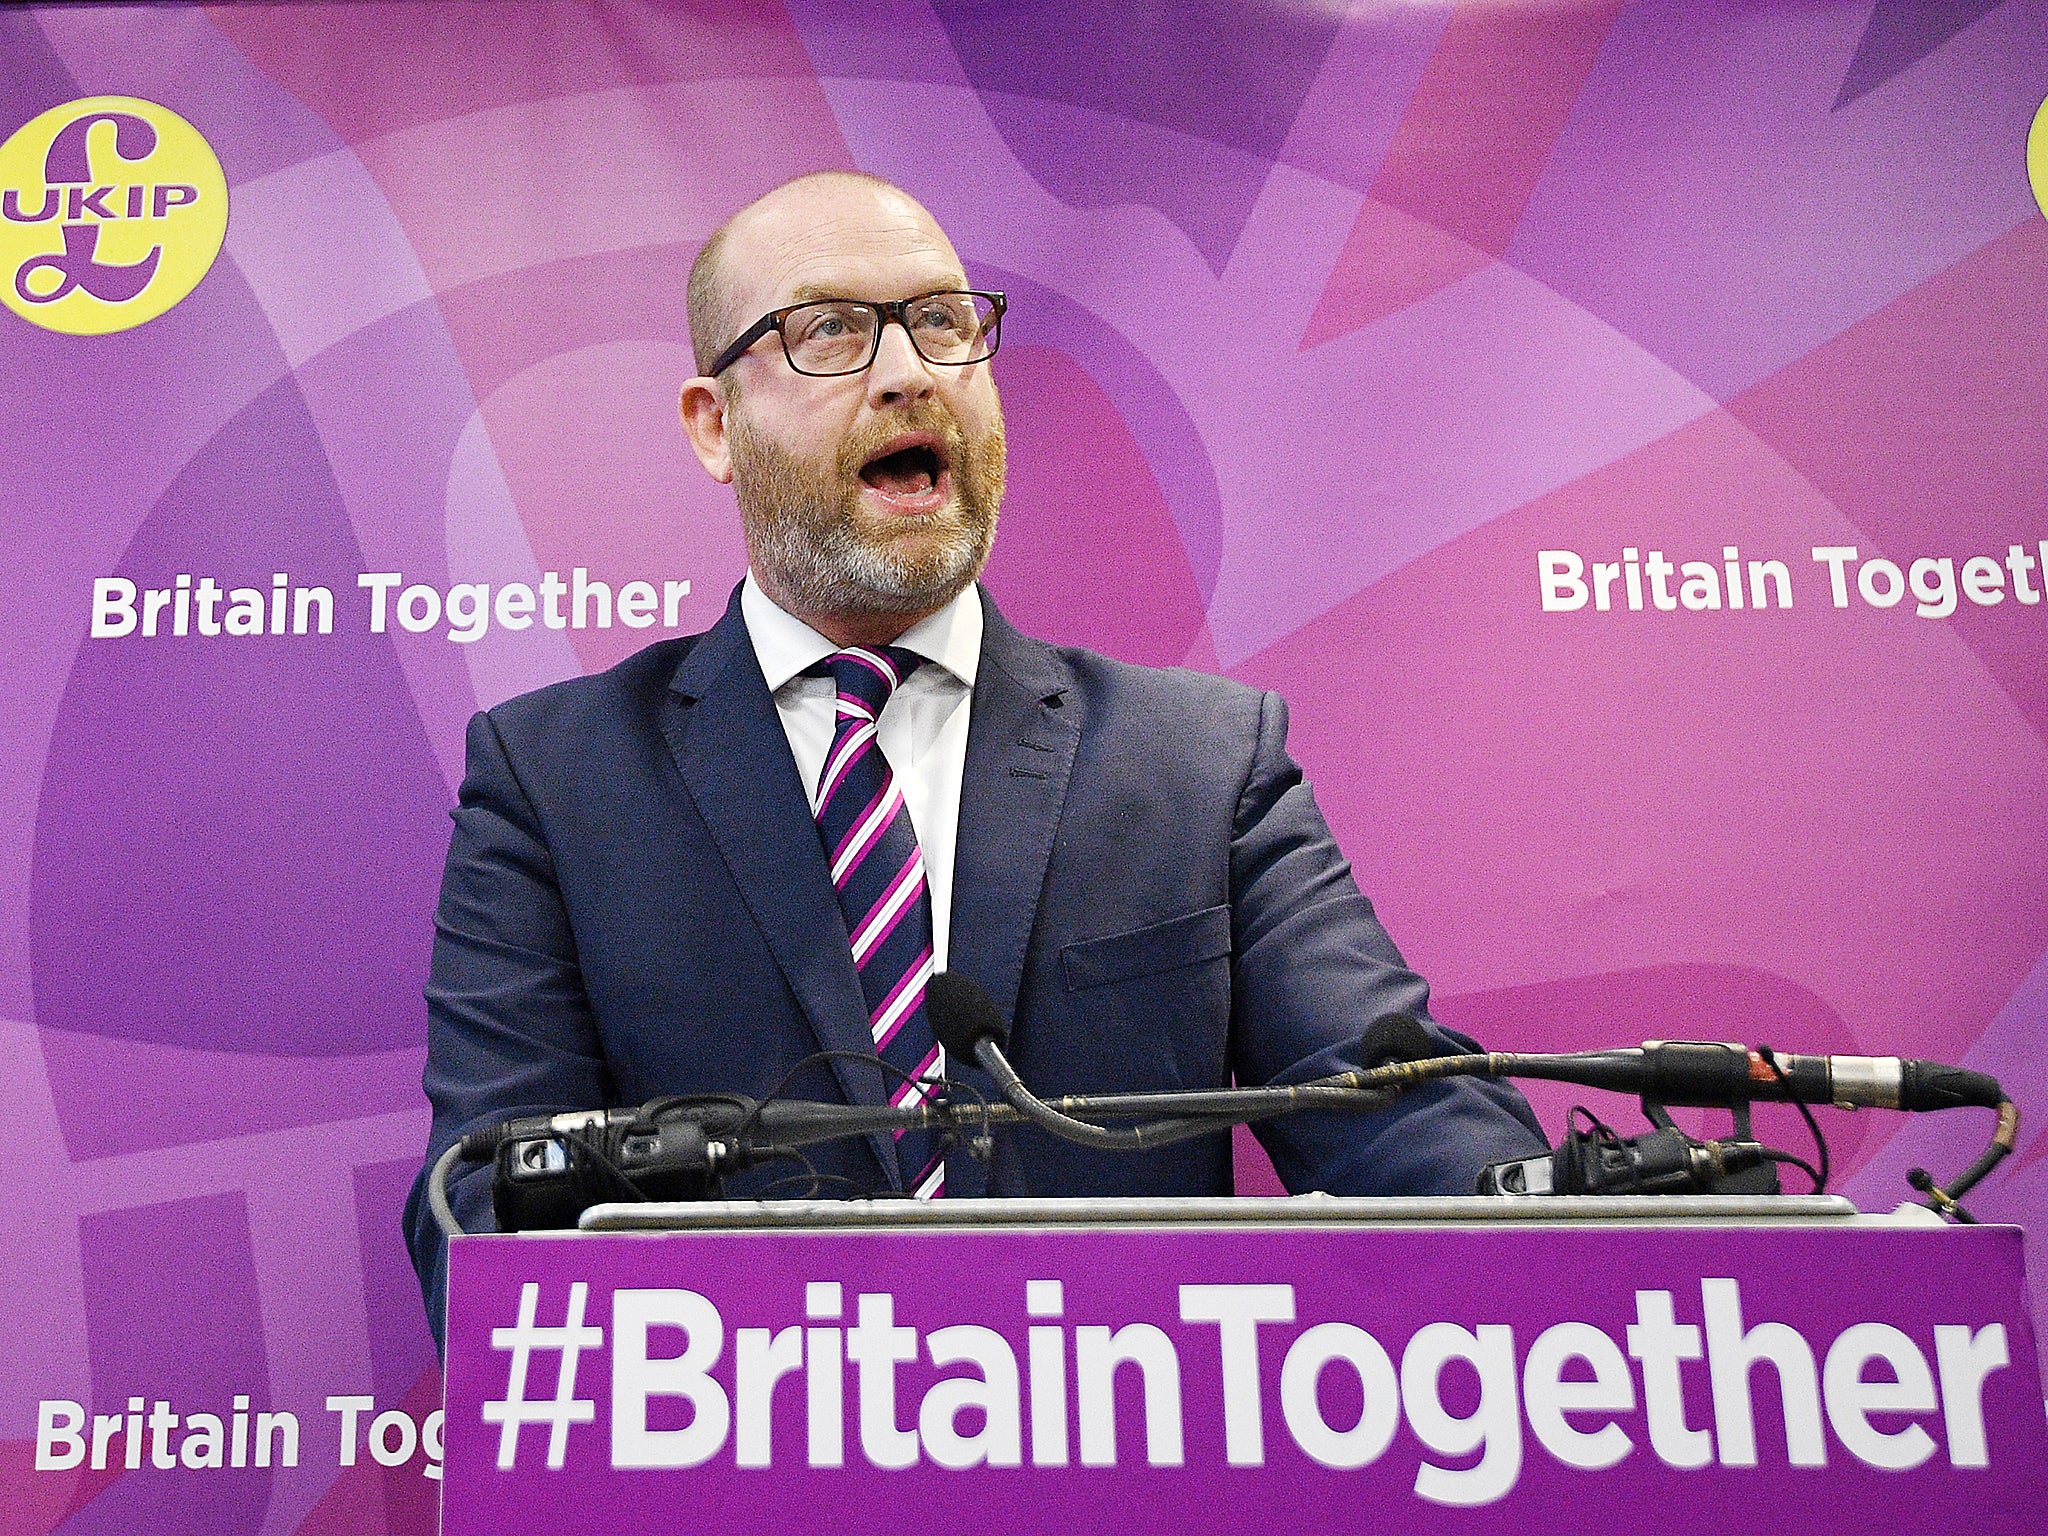 Straining to be heard above a chorus of boos directed at the media, Paul Nutall blamed Theresa May for the terror attack in Manchester